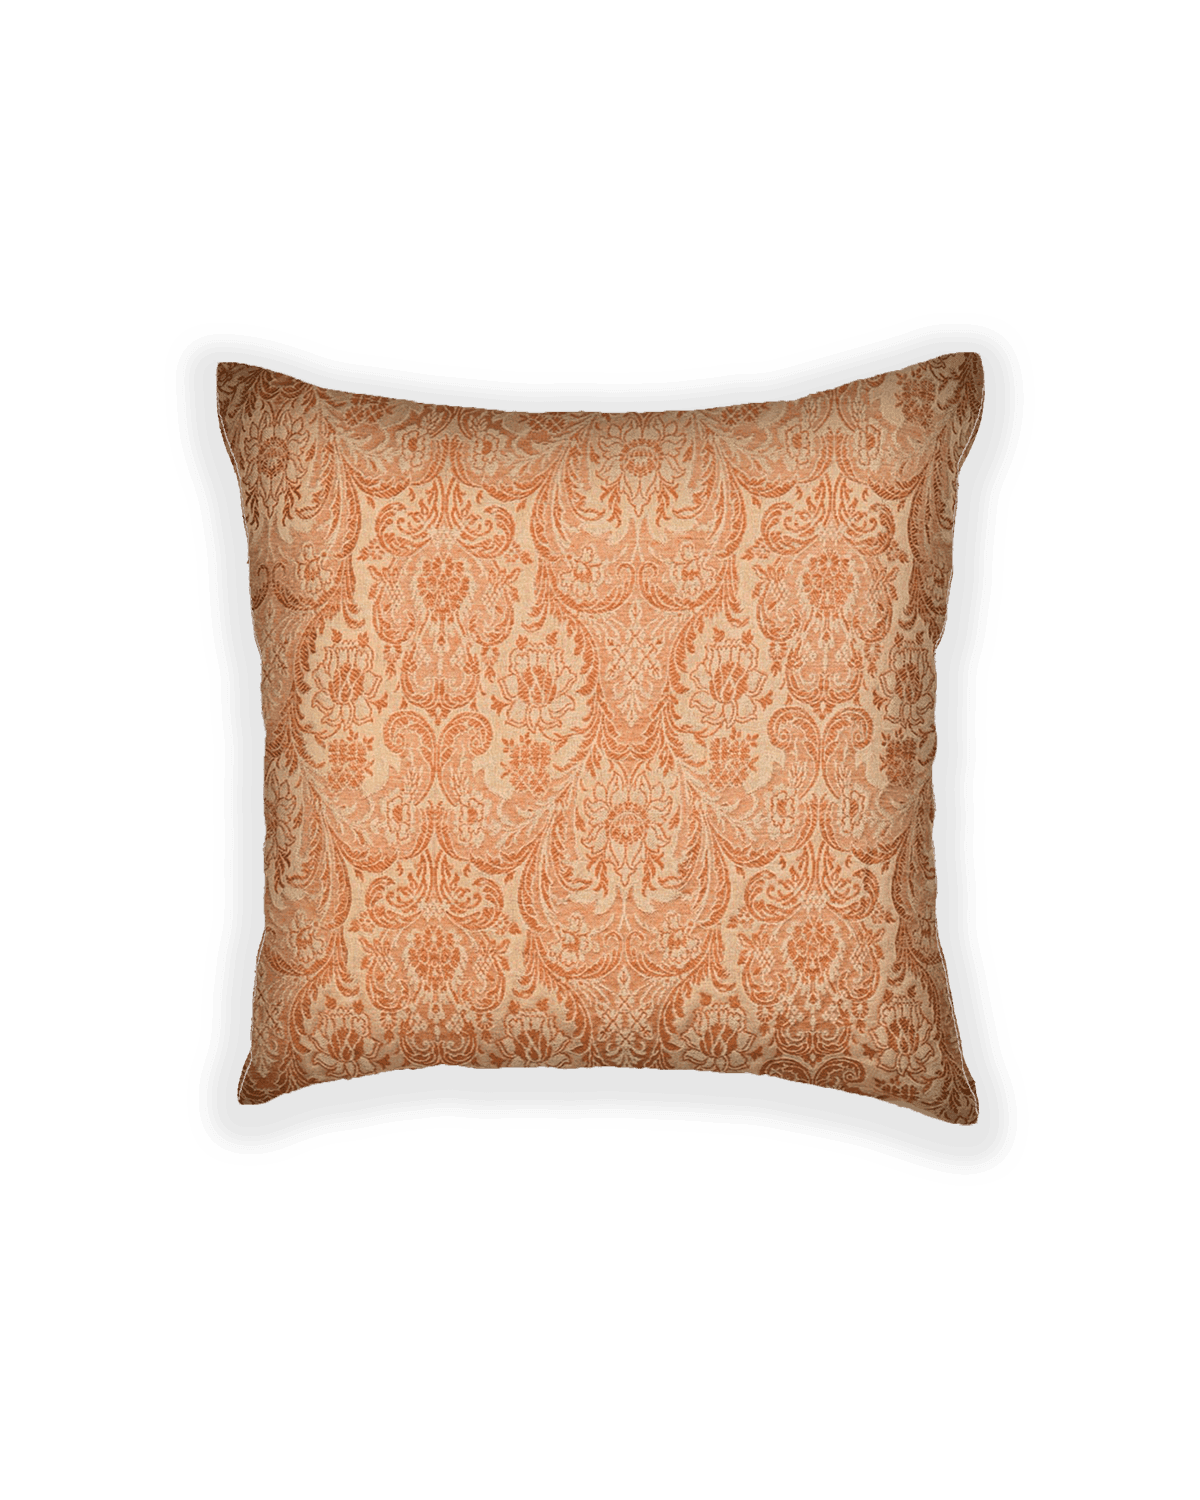 Beige Tanchoi Linen Cotton Cushion Cover 16" - By HolyWeaves, Benares